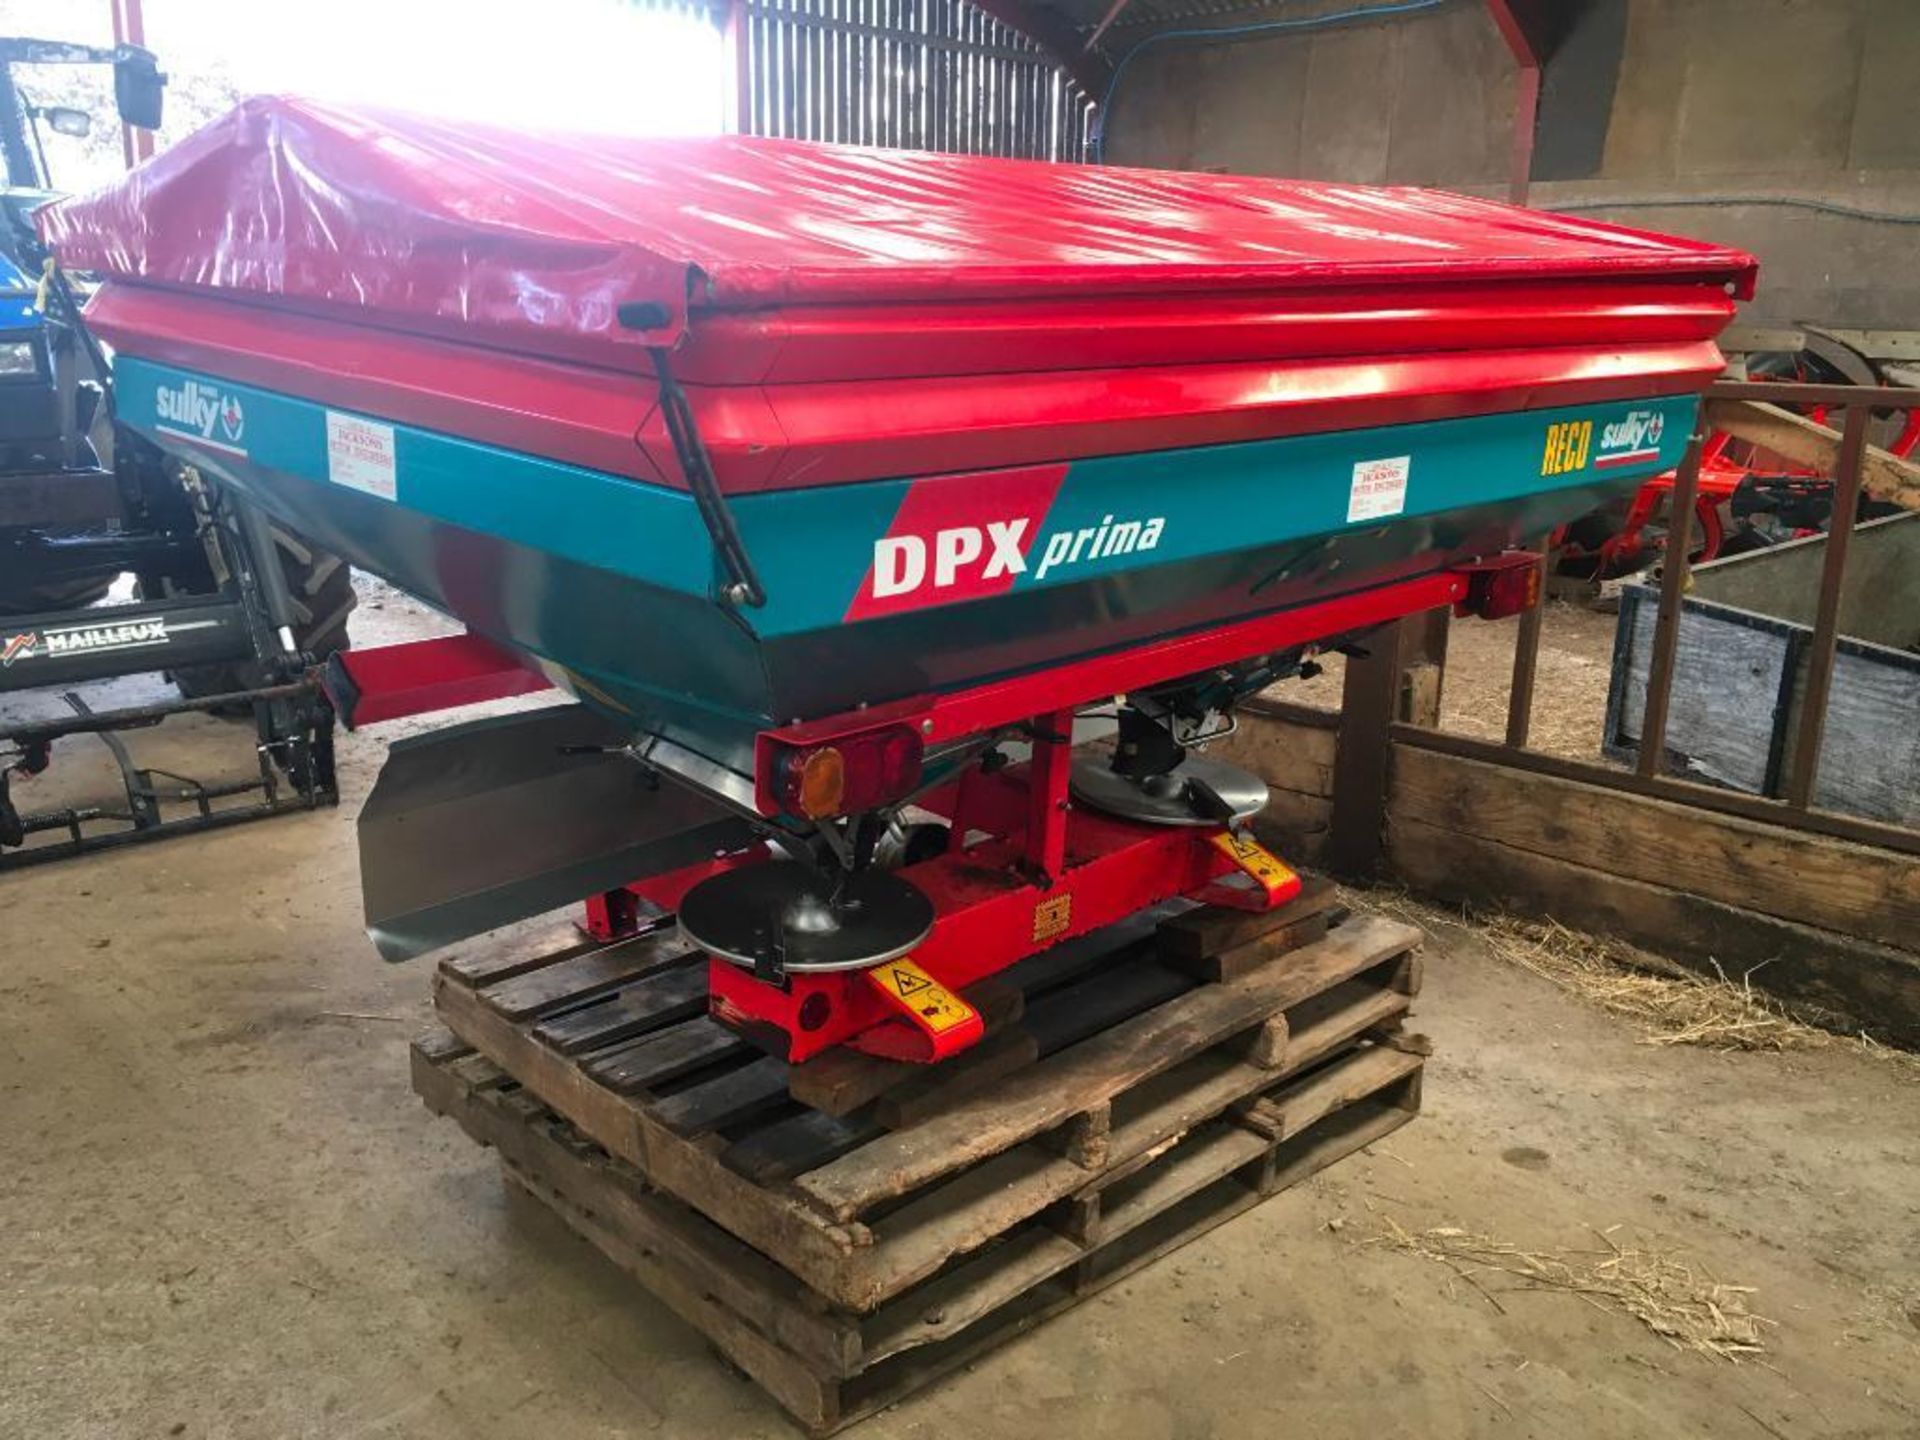 2004 Reco Sulky DPX Prima fertiliser spreader, vari width 12-24m, on farm from new. Serial No: DX011 - Image 4 of 6